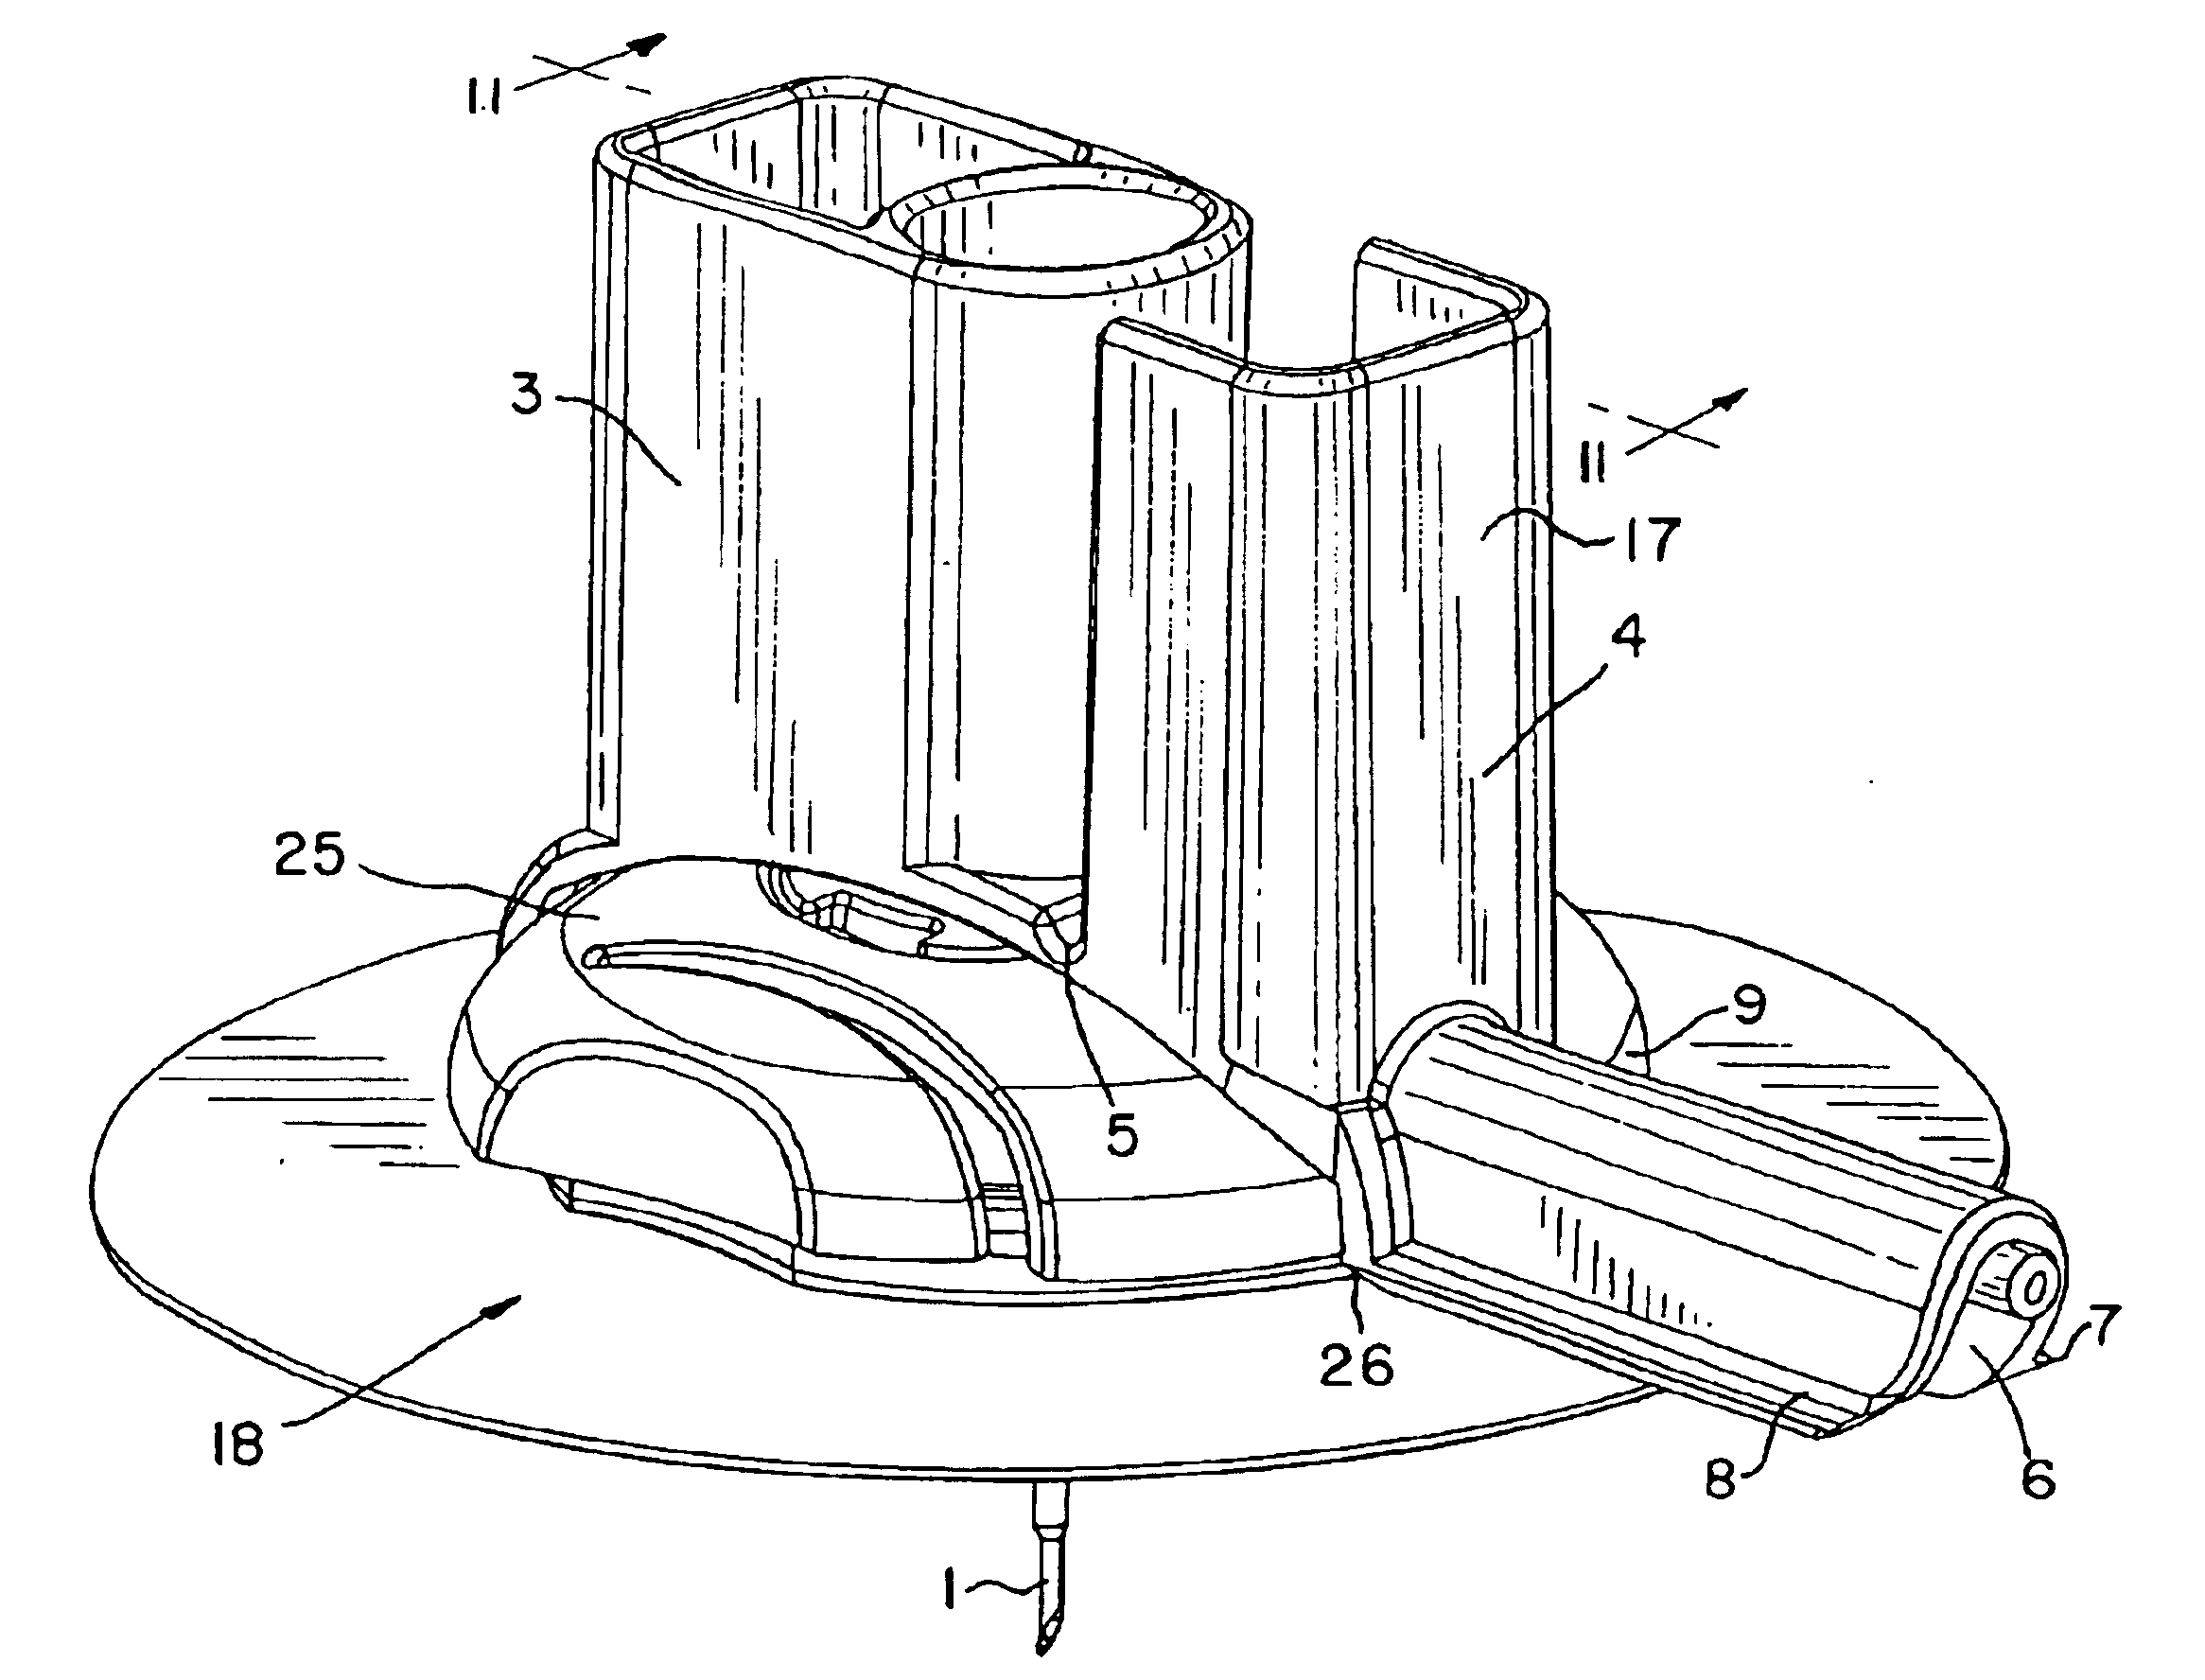 Medical puncturing device